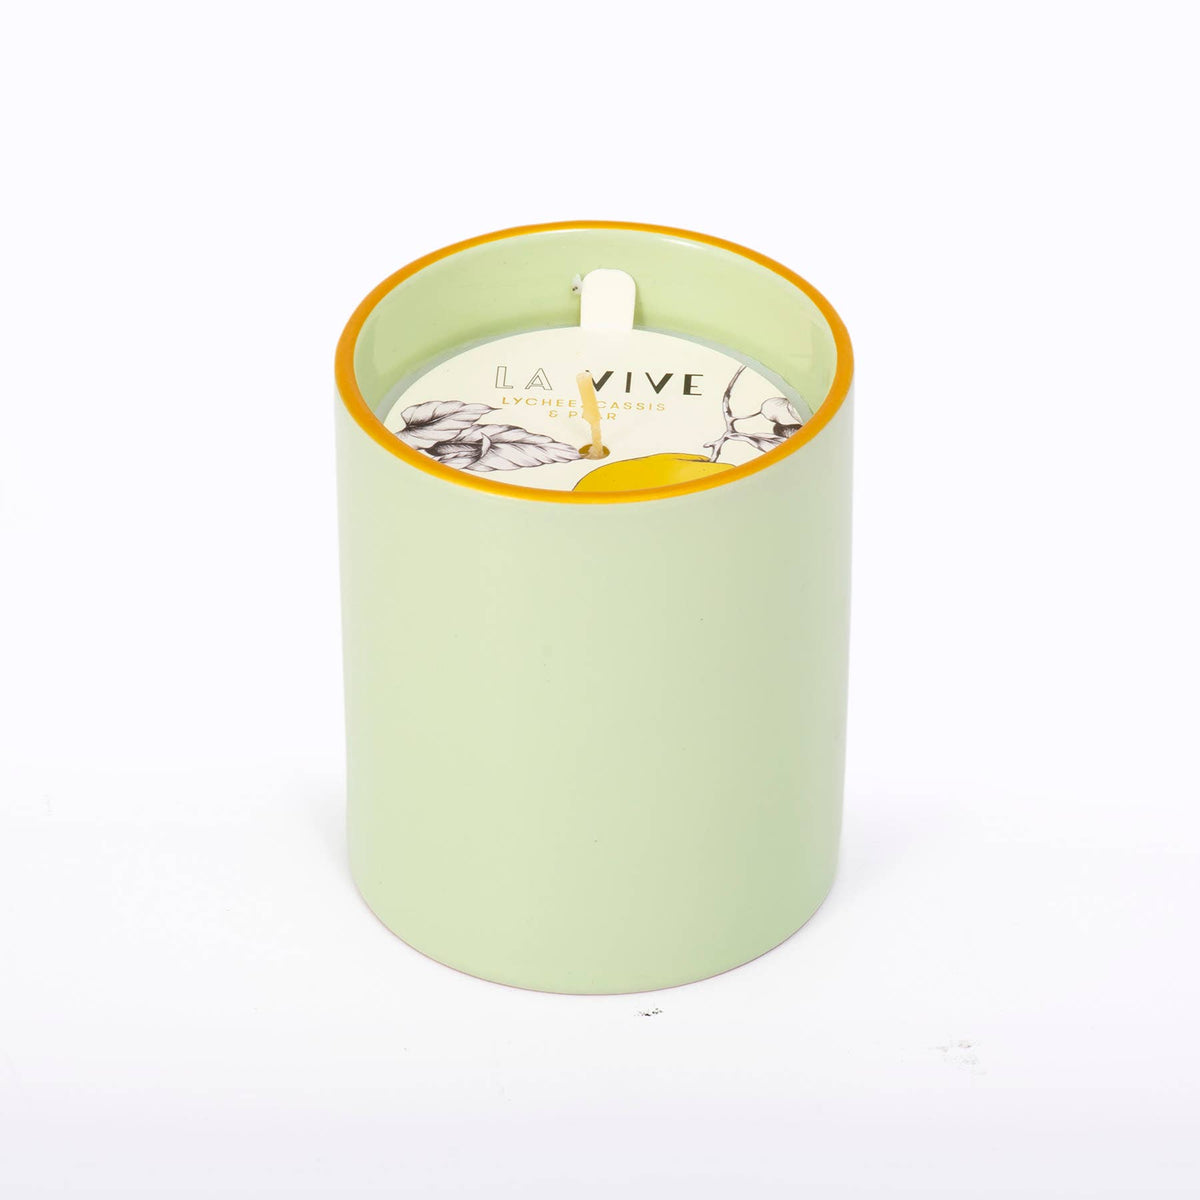 Medium Candle | La Vive - Asian Pear, Lychee and Cassis | L&#39;or de Seraphine